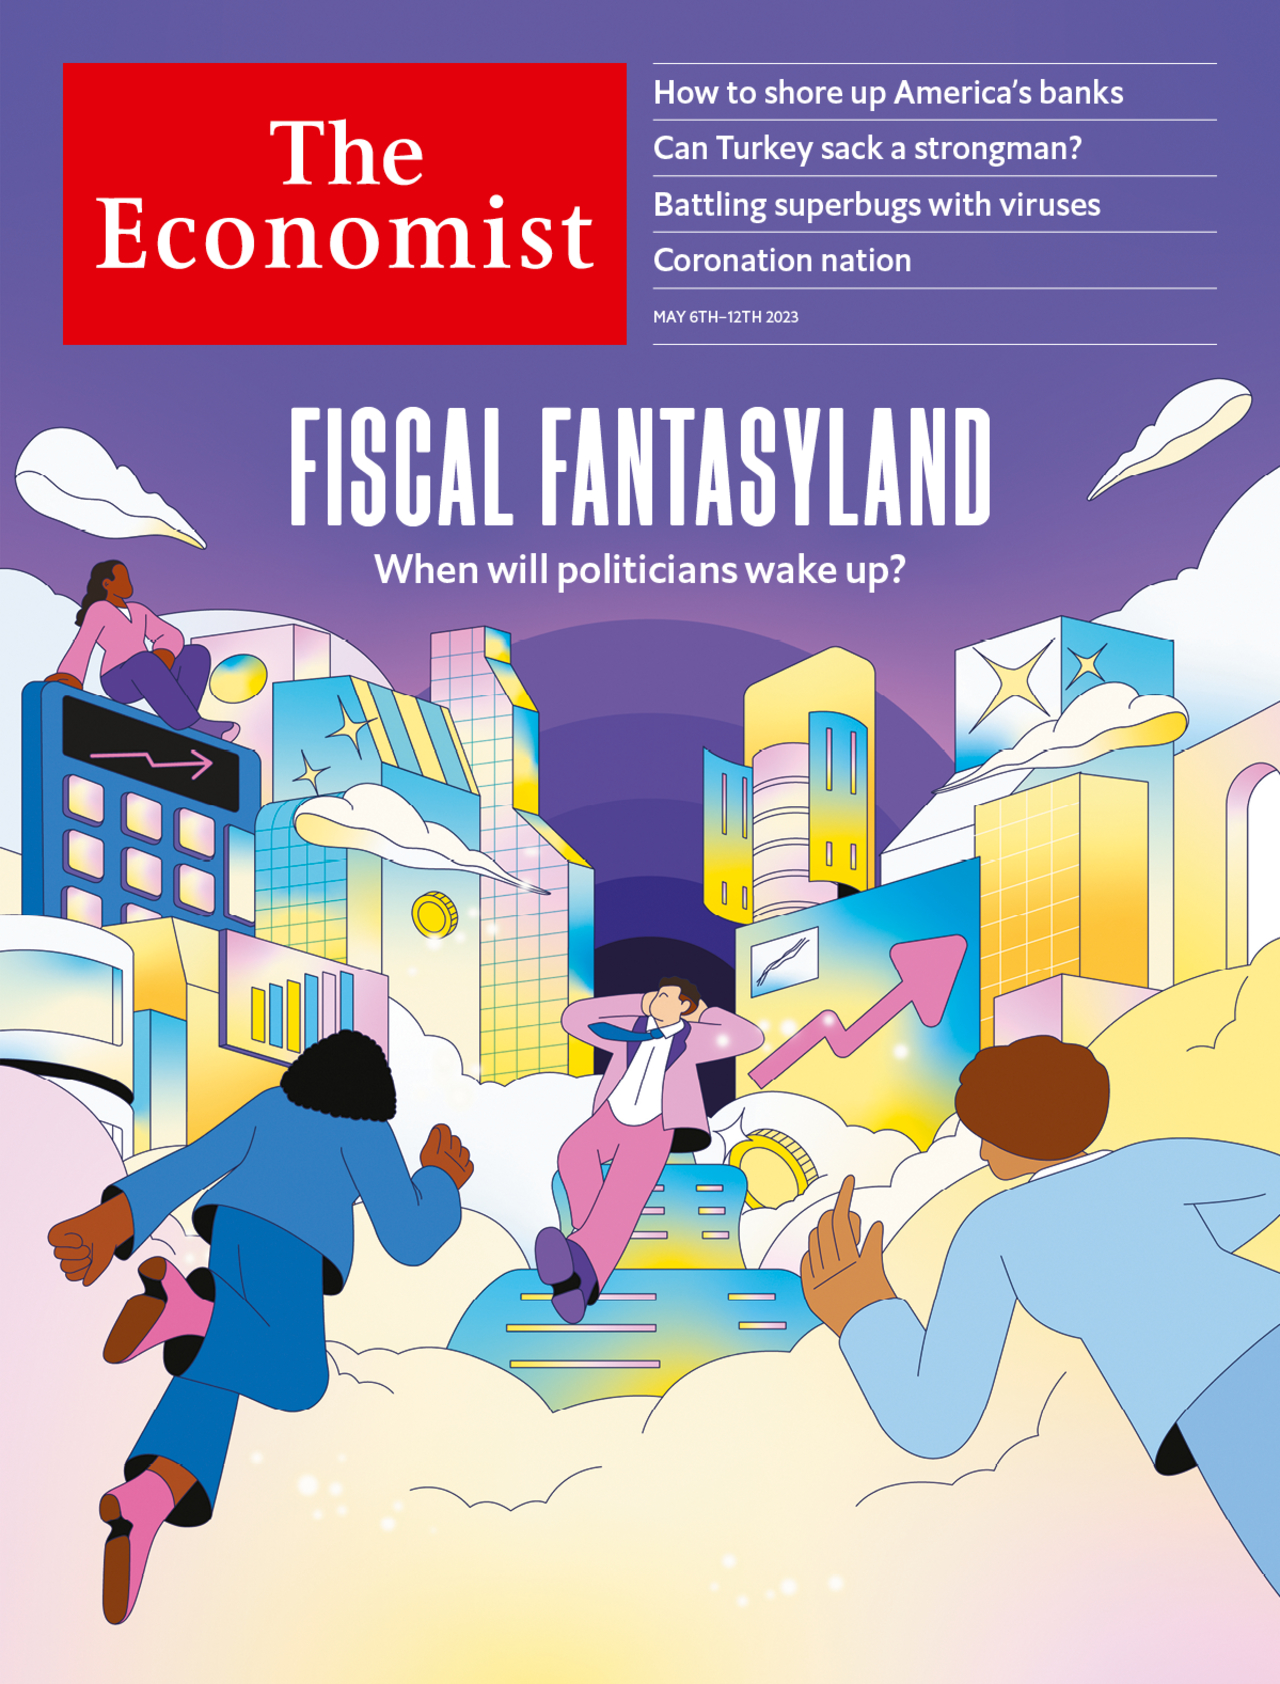 Fiscal fantasyland: When will politicians wake up?